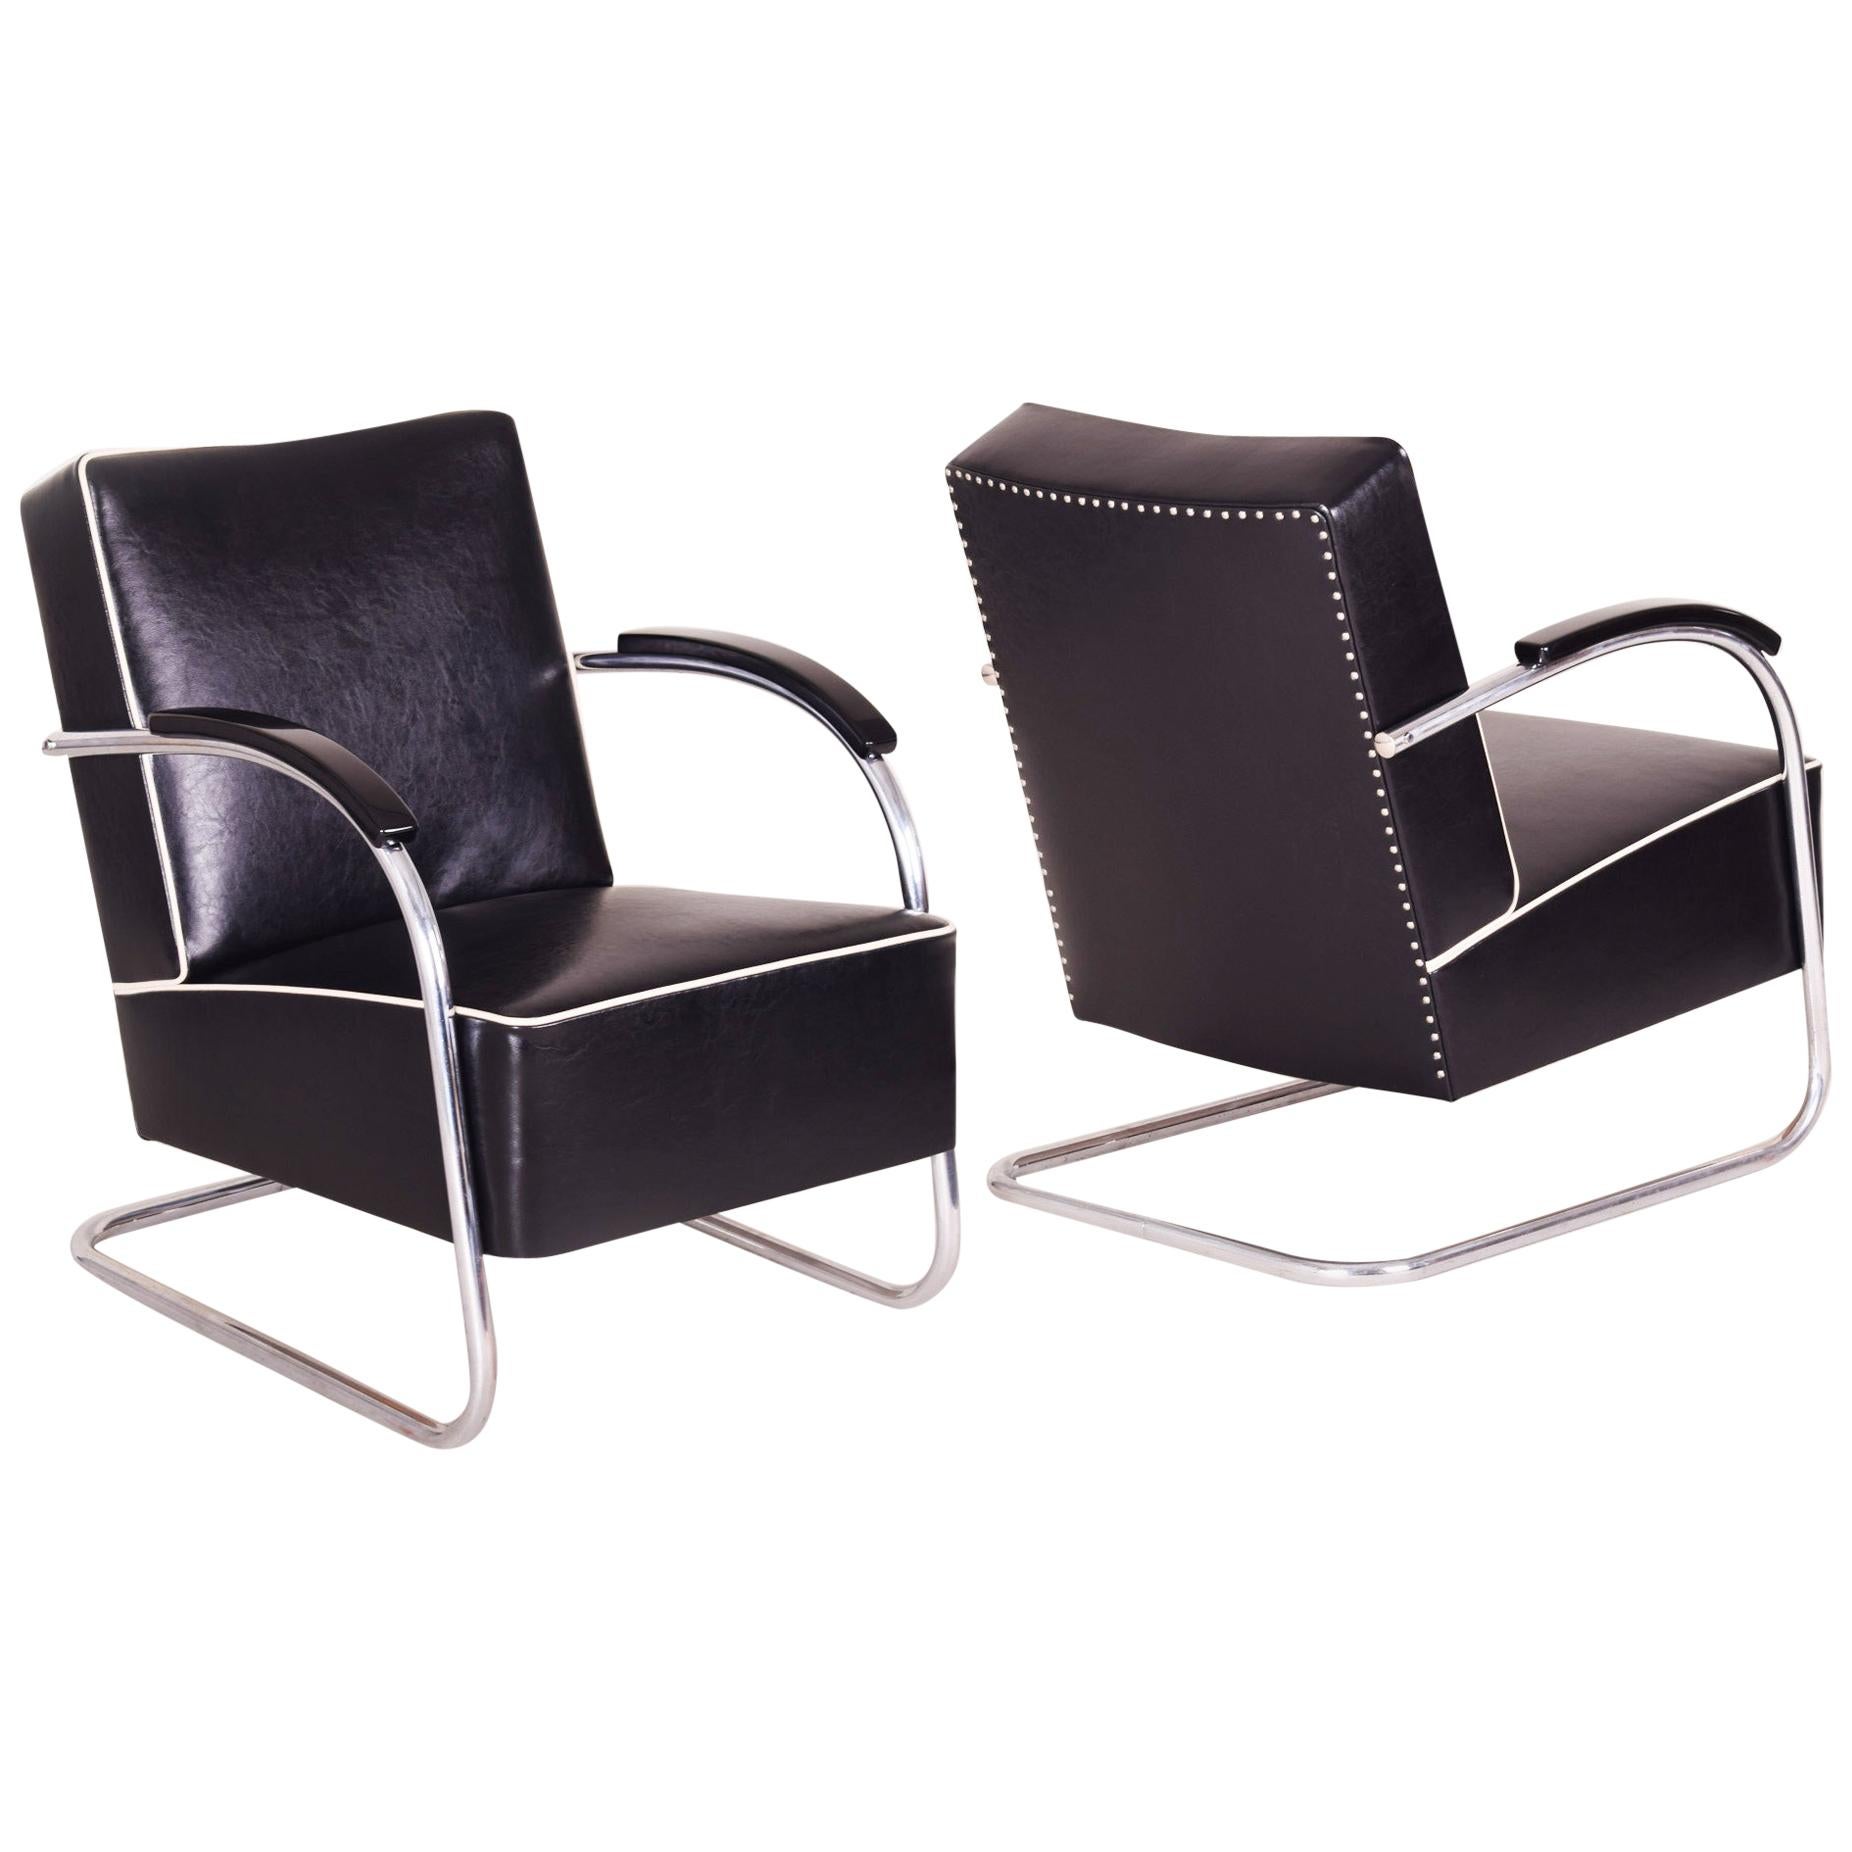 Pair of Black Tubular Steel Cantilever Armchairs, Chrome, New Upholstery, 1930s For Sale